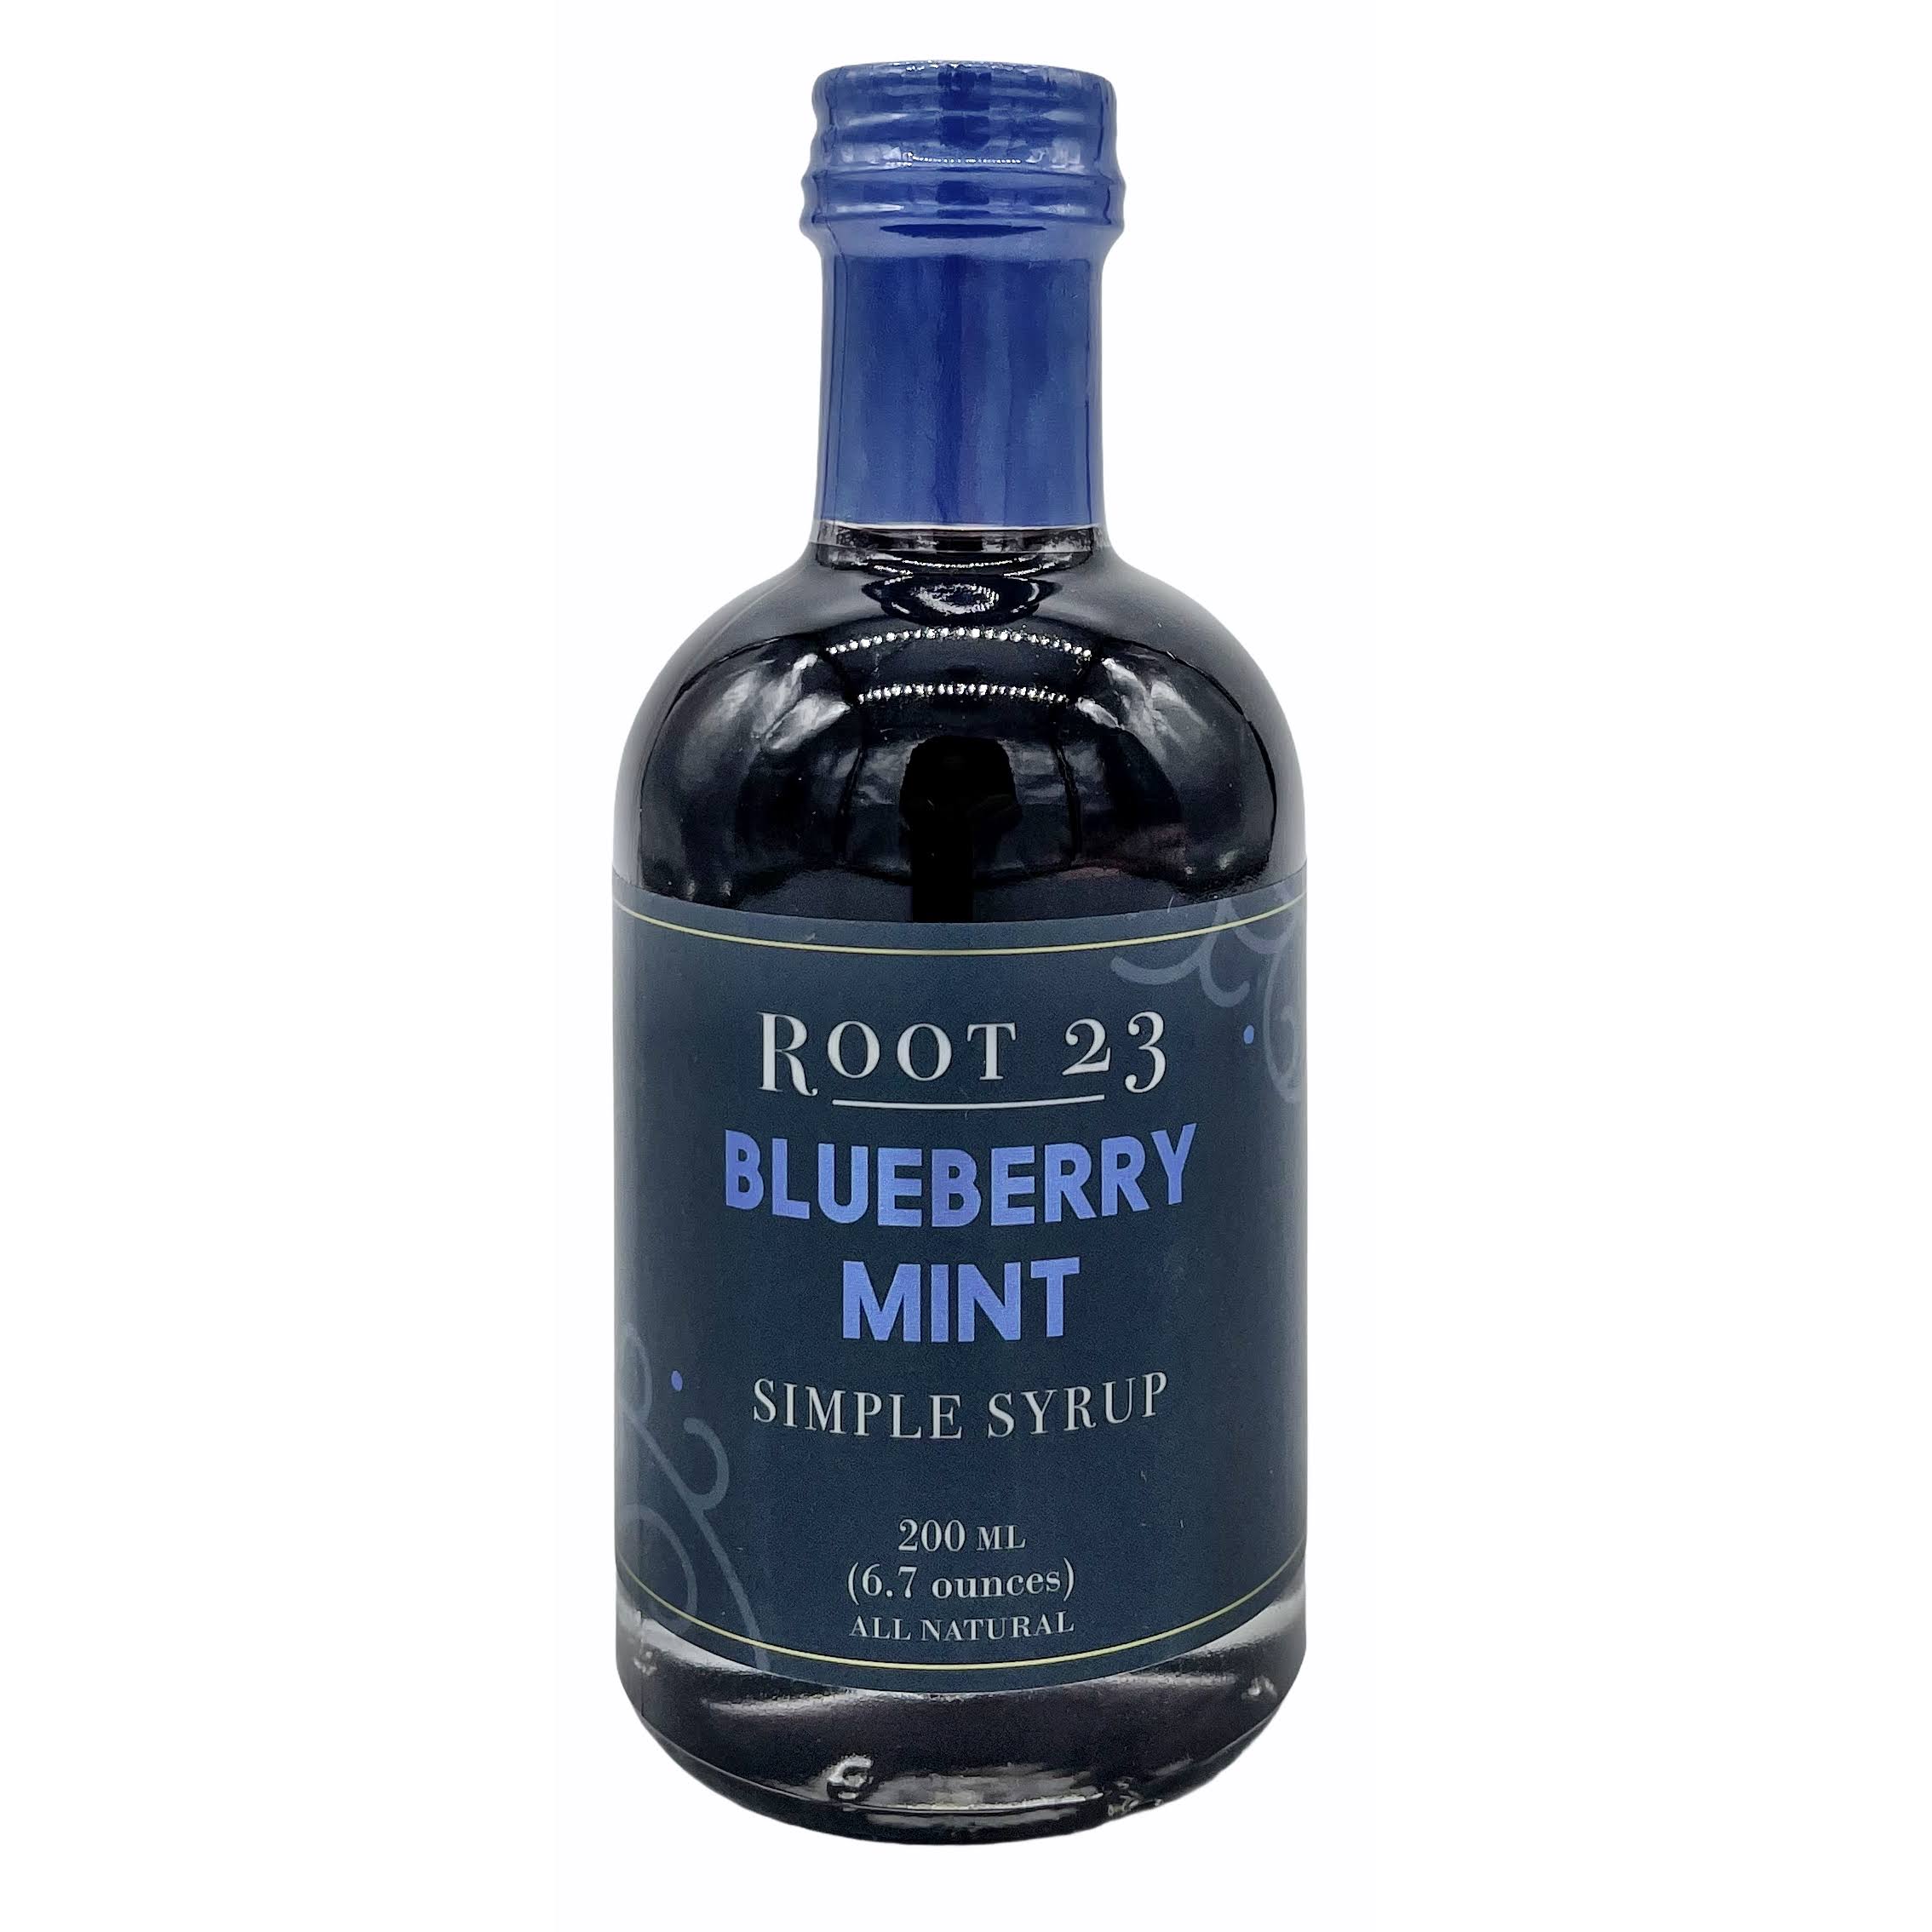 Root 23 Blueberry Mint Simple Syrup